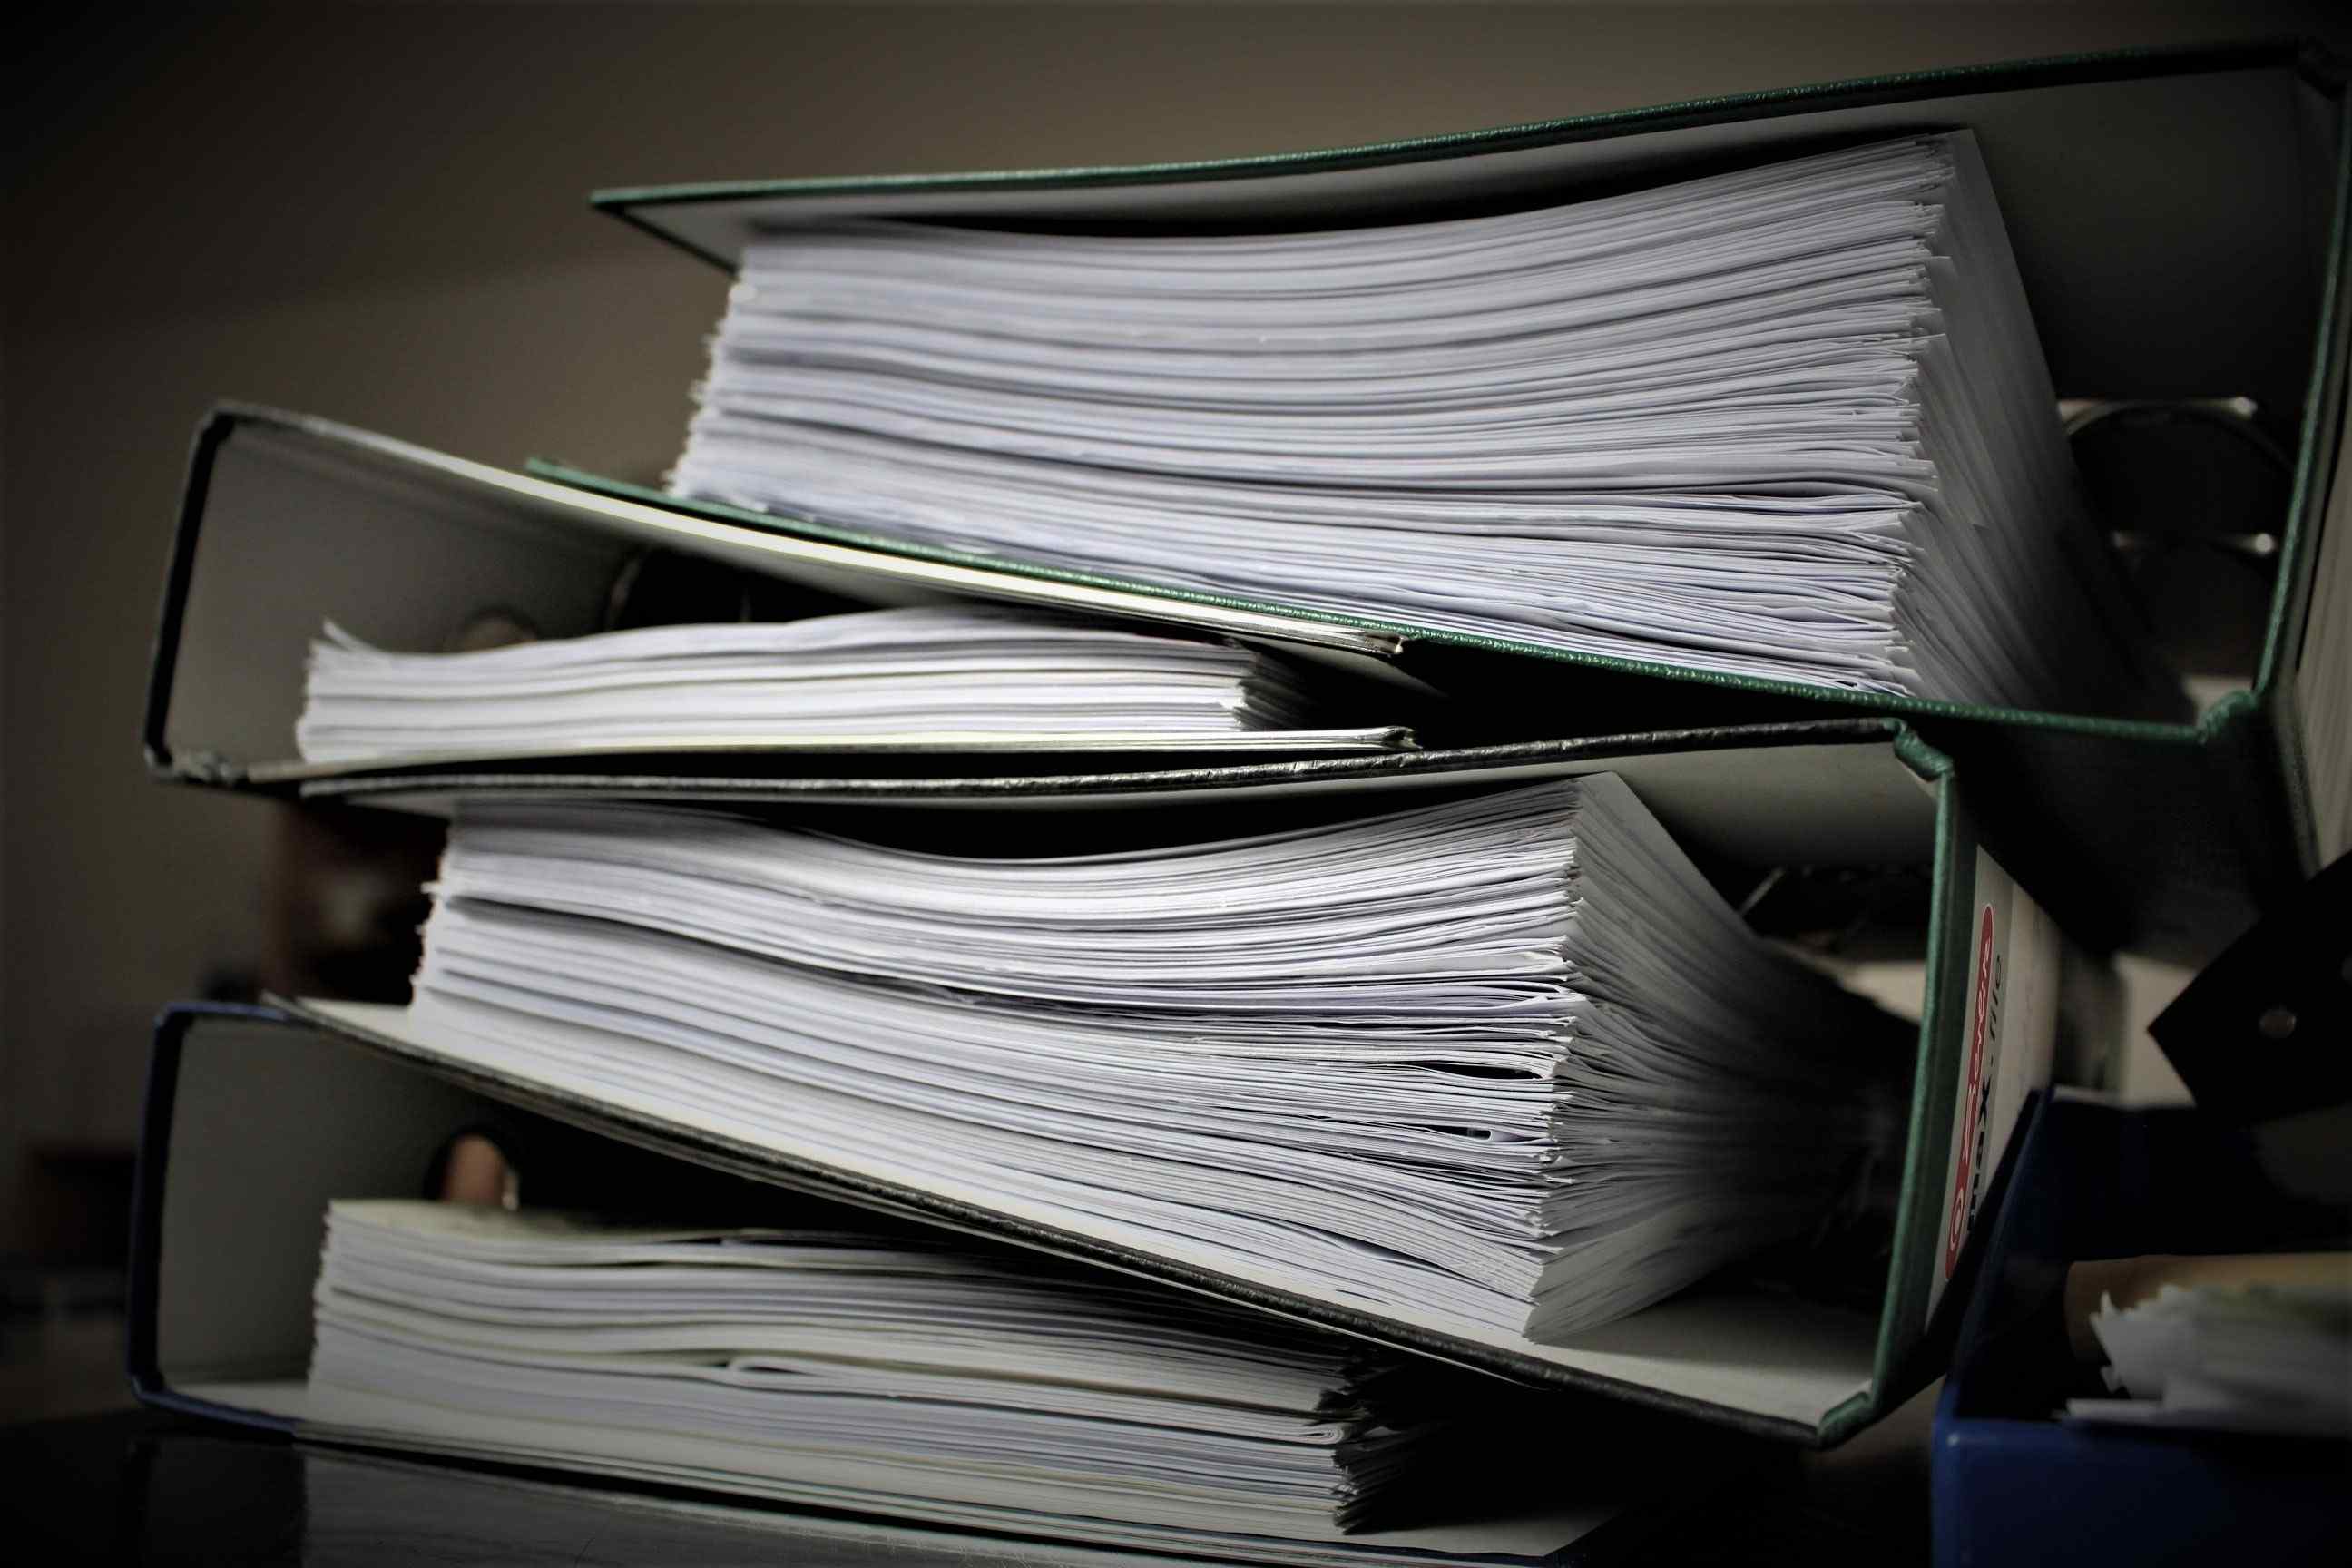 5 Reasons To Retain Physical Copies Of Important Documents